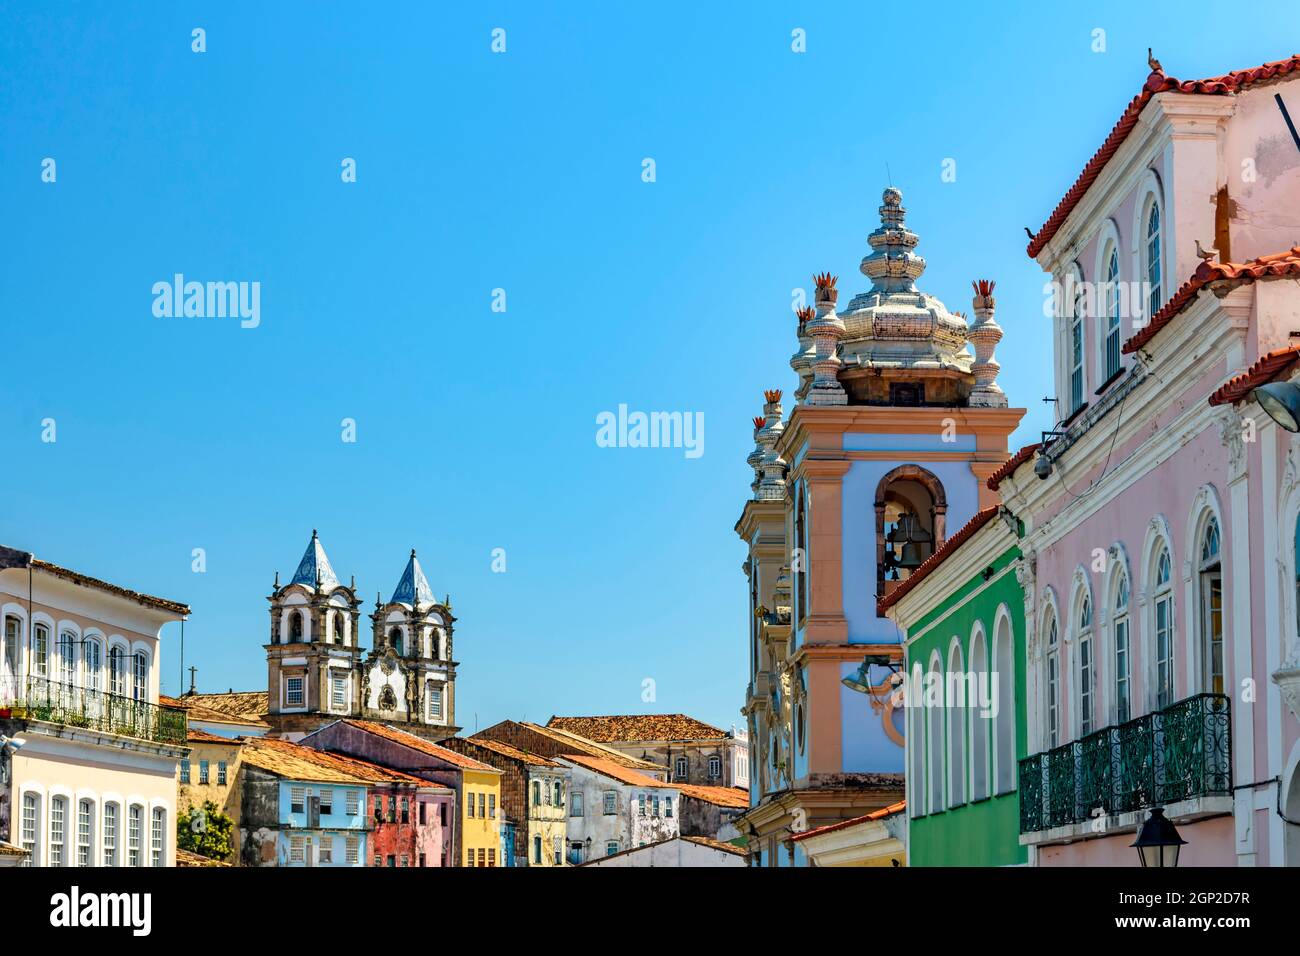 Colorful facades and historic church towers in baroque and colonial style in the famous Pelourinho neighborhood of Salvador, Bahia Stock Photo